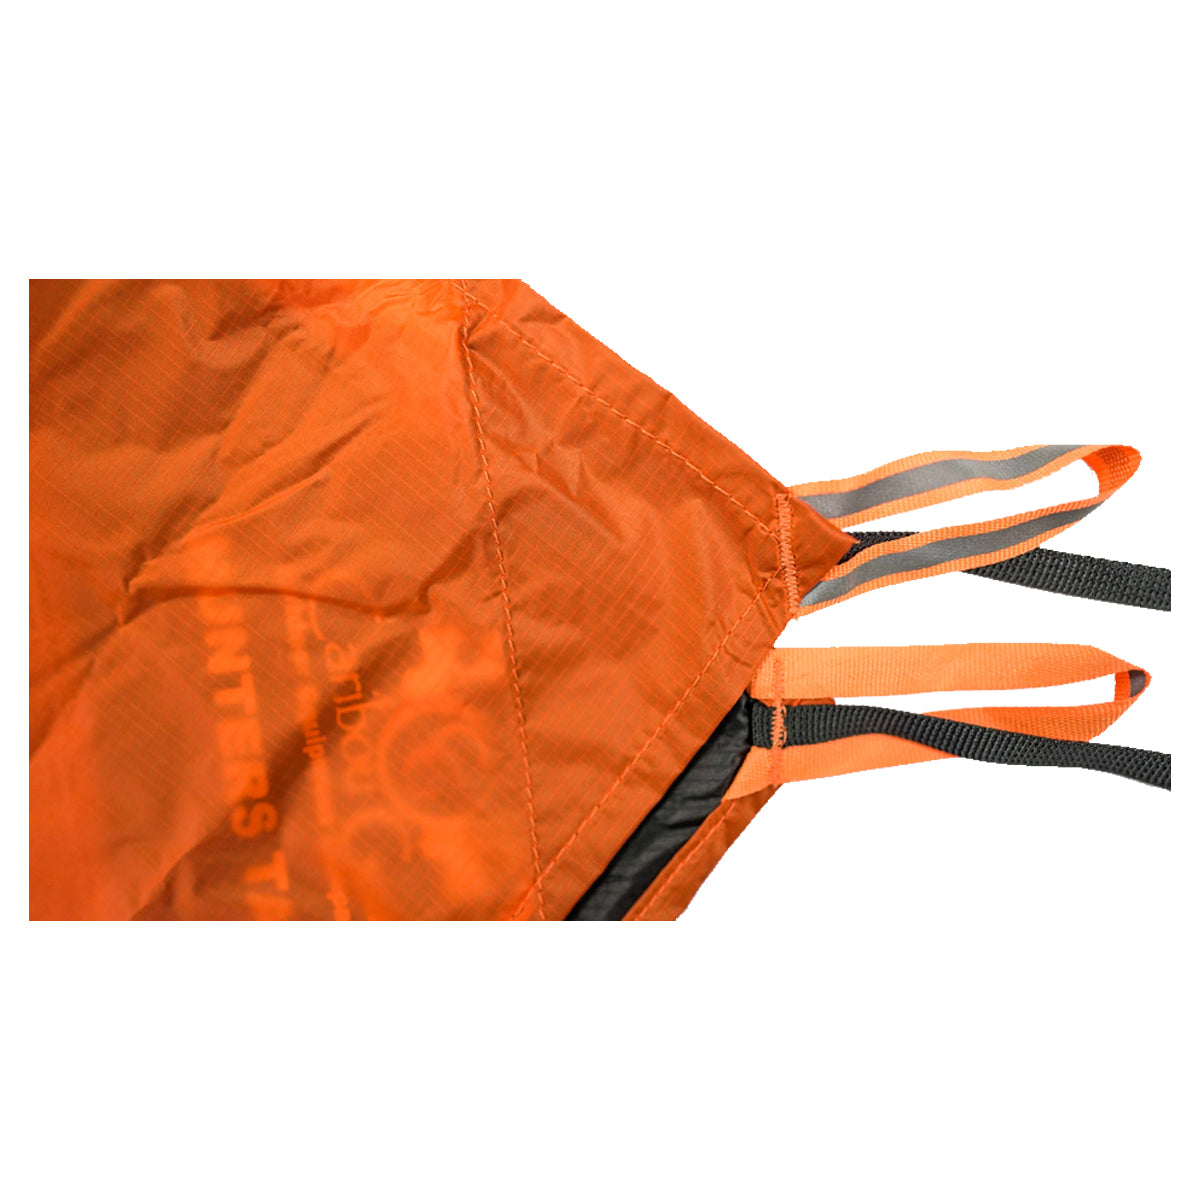 Hunters Tarp® Meat Pack Liner by Caribou Gear® – Caribou Gear Outdoor  Equipment Company